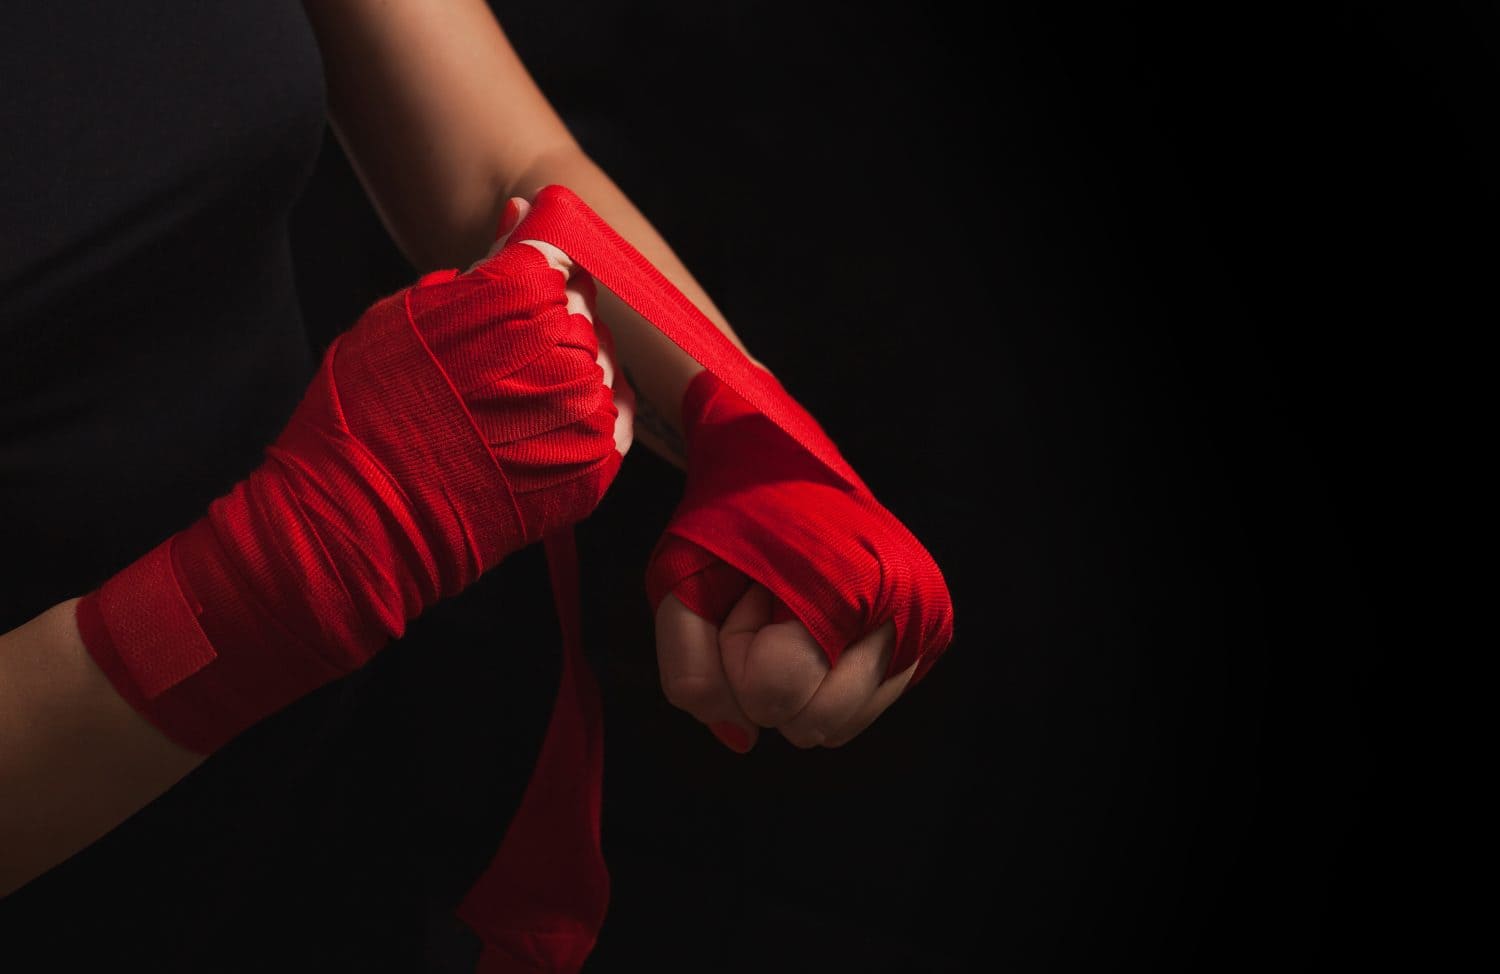 Female boxer is wrapping hands with red wrap, black background with copy space. Strong, ready for fighting or sparring. Women self defense.